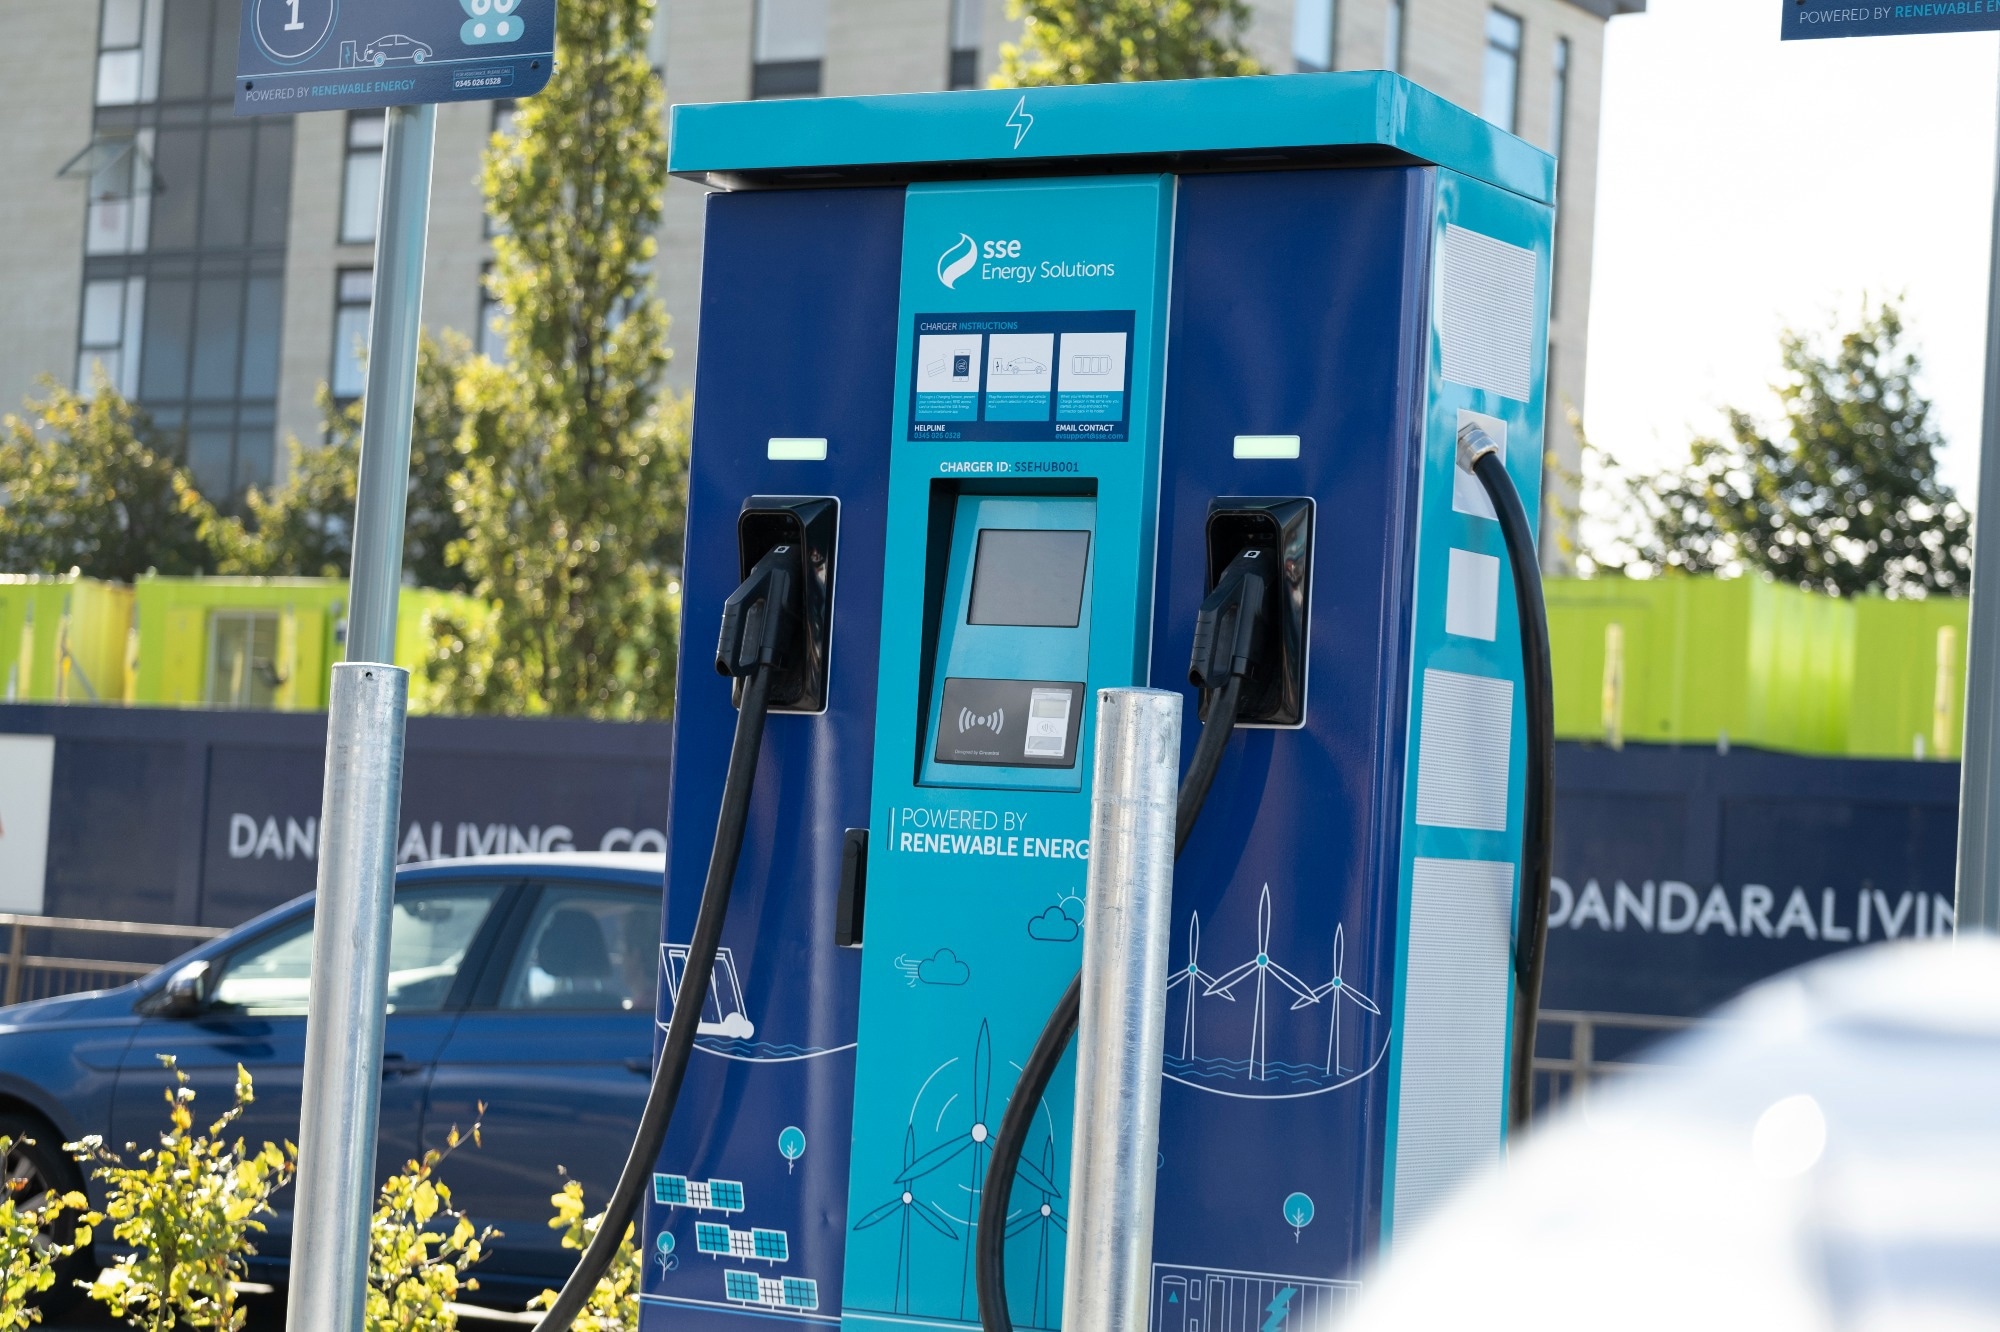 Scotland’s Most Powerful EV Charging Hub Confirmed for Dundee